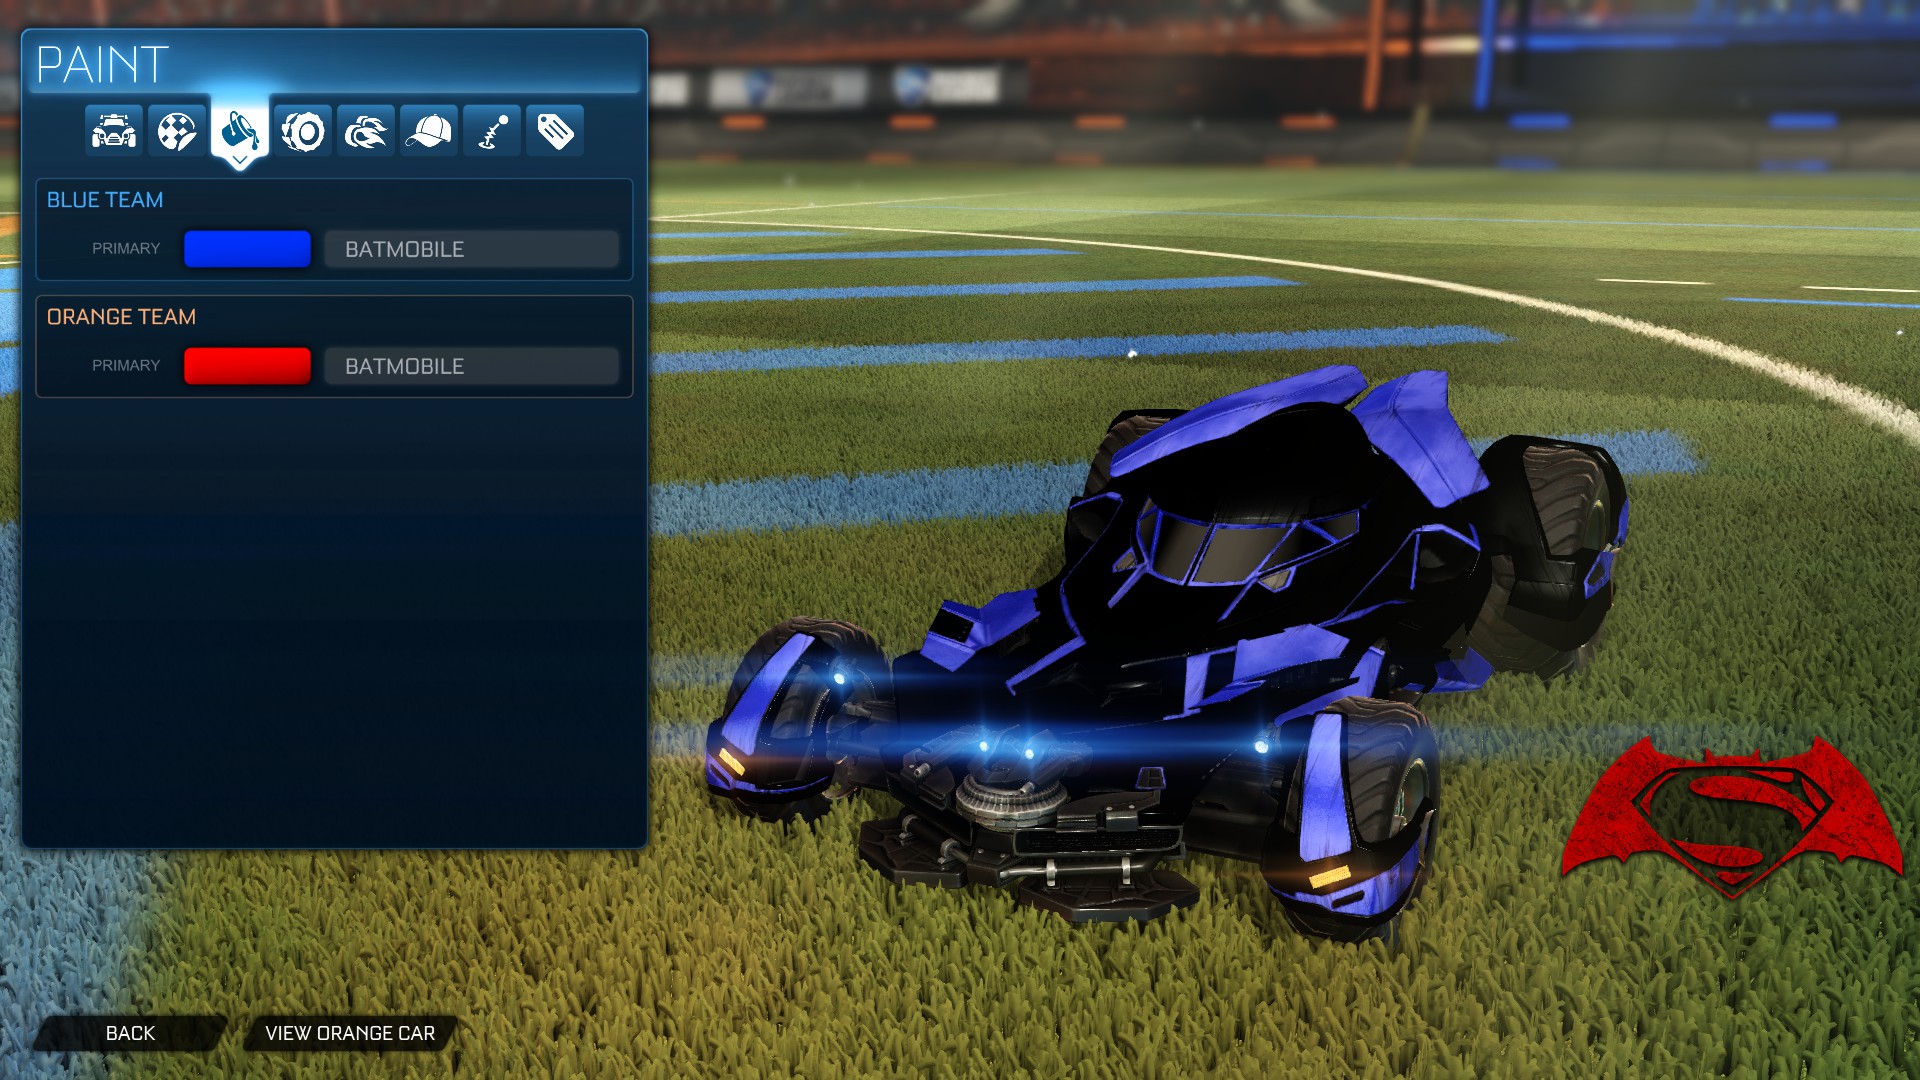 Batmobile Black edition (full black/black body with teamcolors)